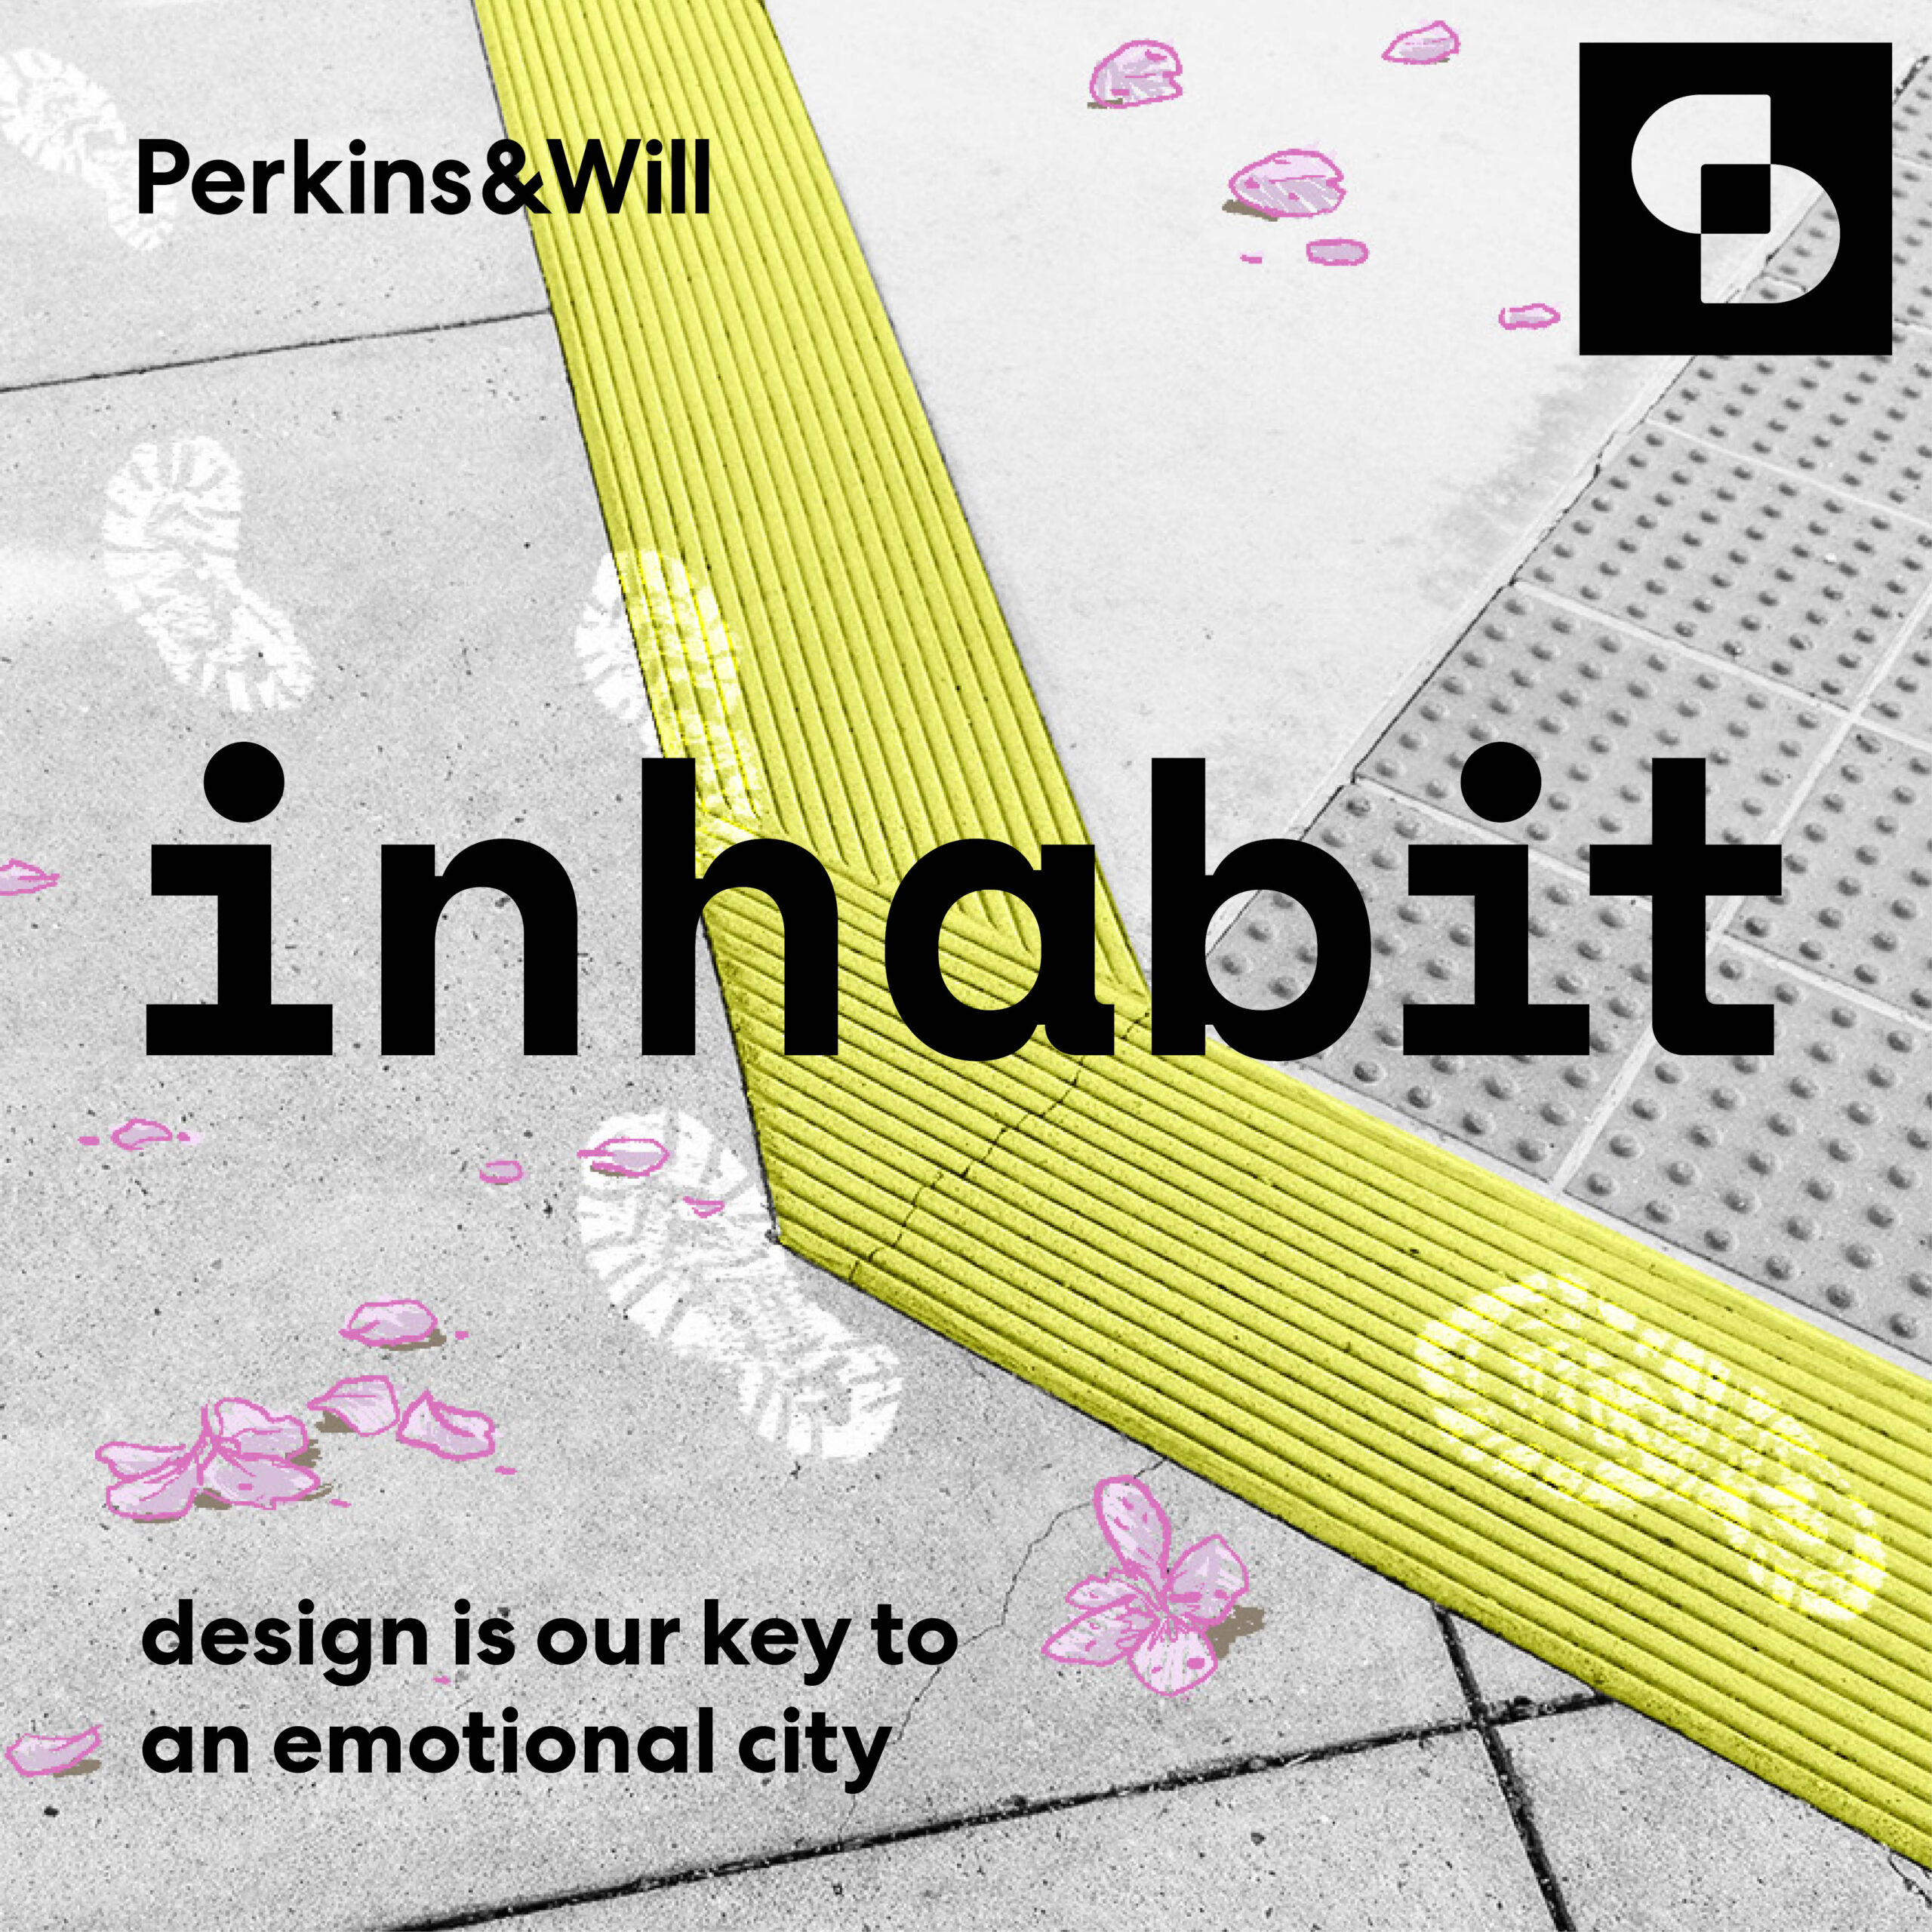 Concrete sidewalk intersection with yellow tactile paving, overlaid with hand-drawn sneaker footsteps and purply pink cherry blossoms. Perkins&Will and Inhabit, and SURROUND logos + series title in lower left: Design Is Our Key to an Emotional City.